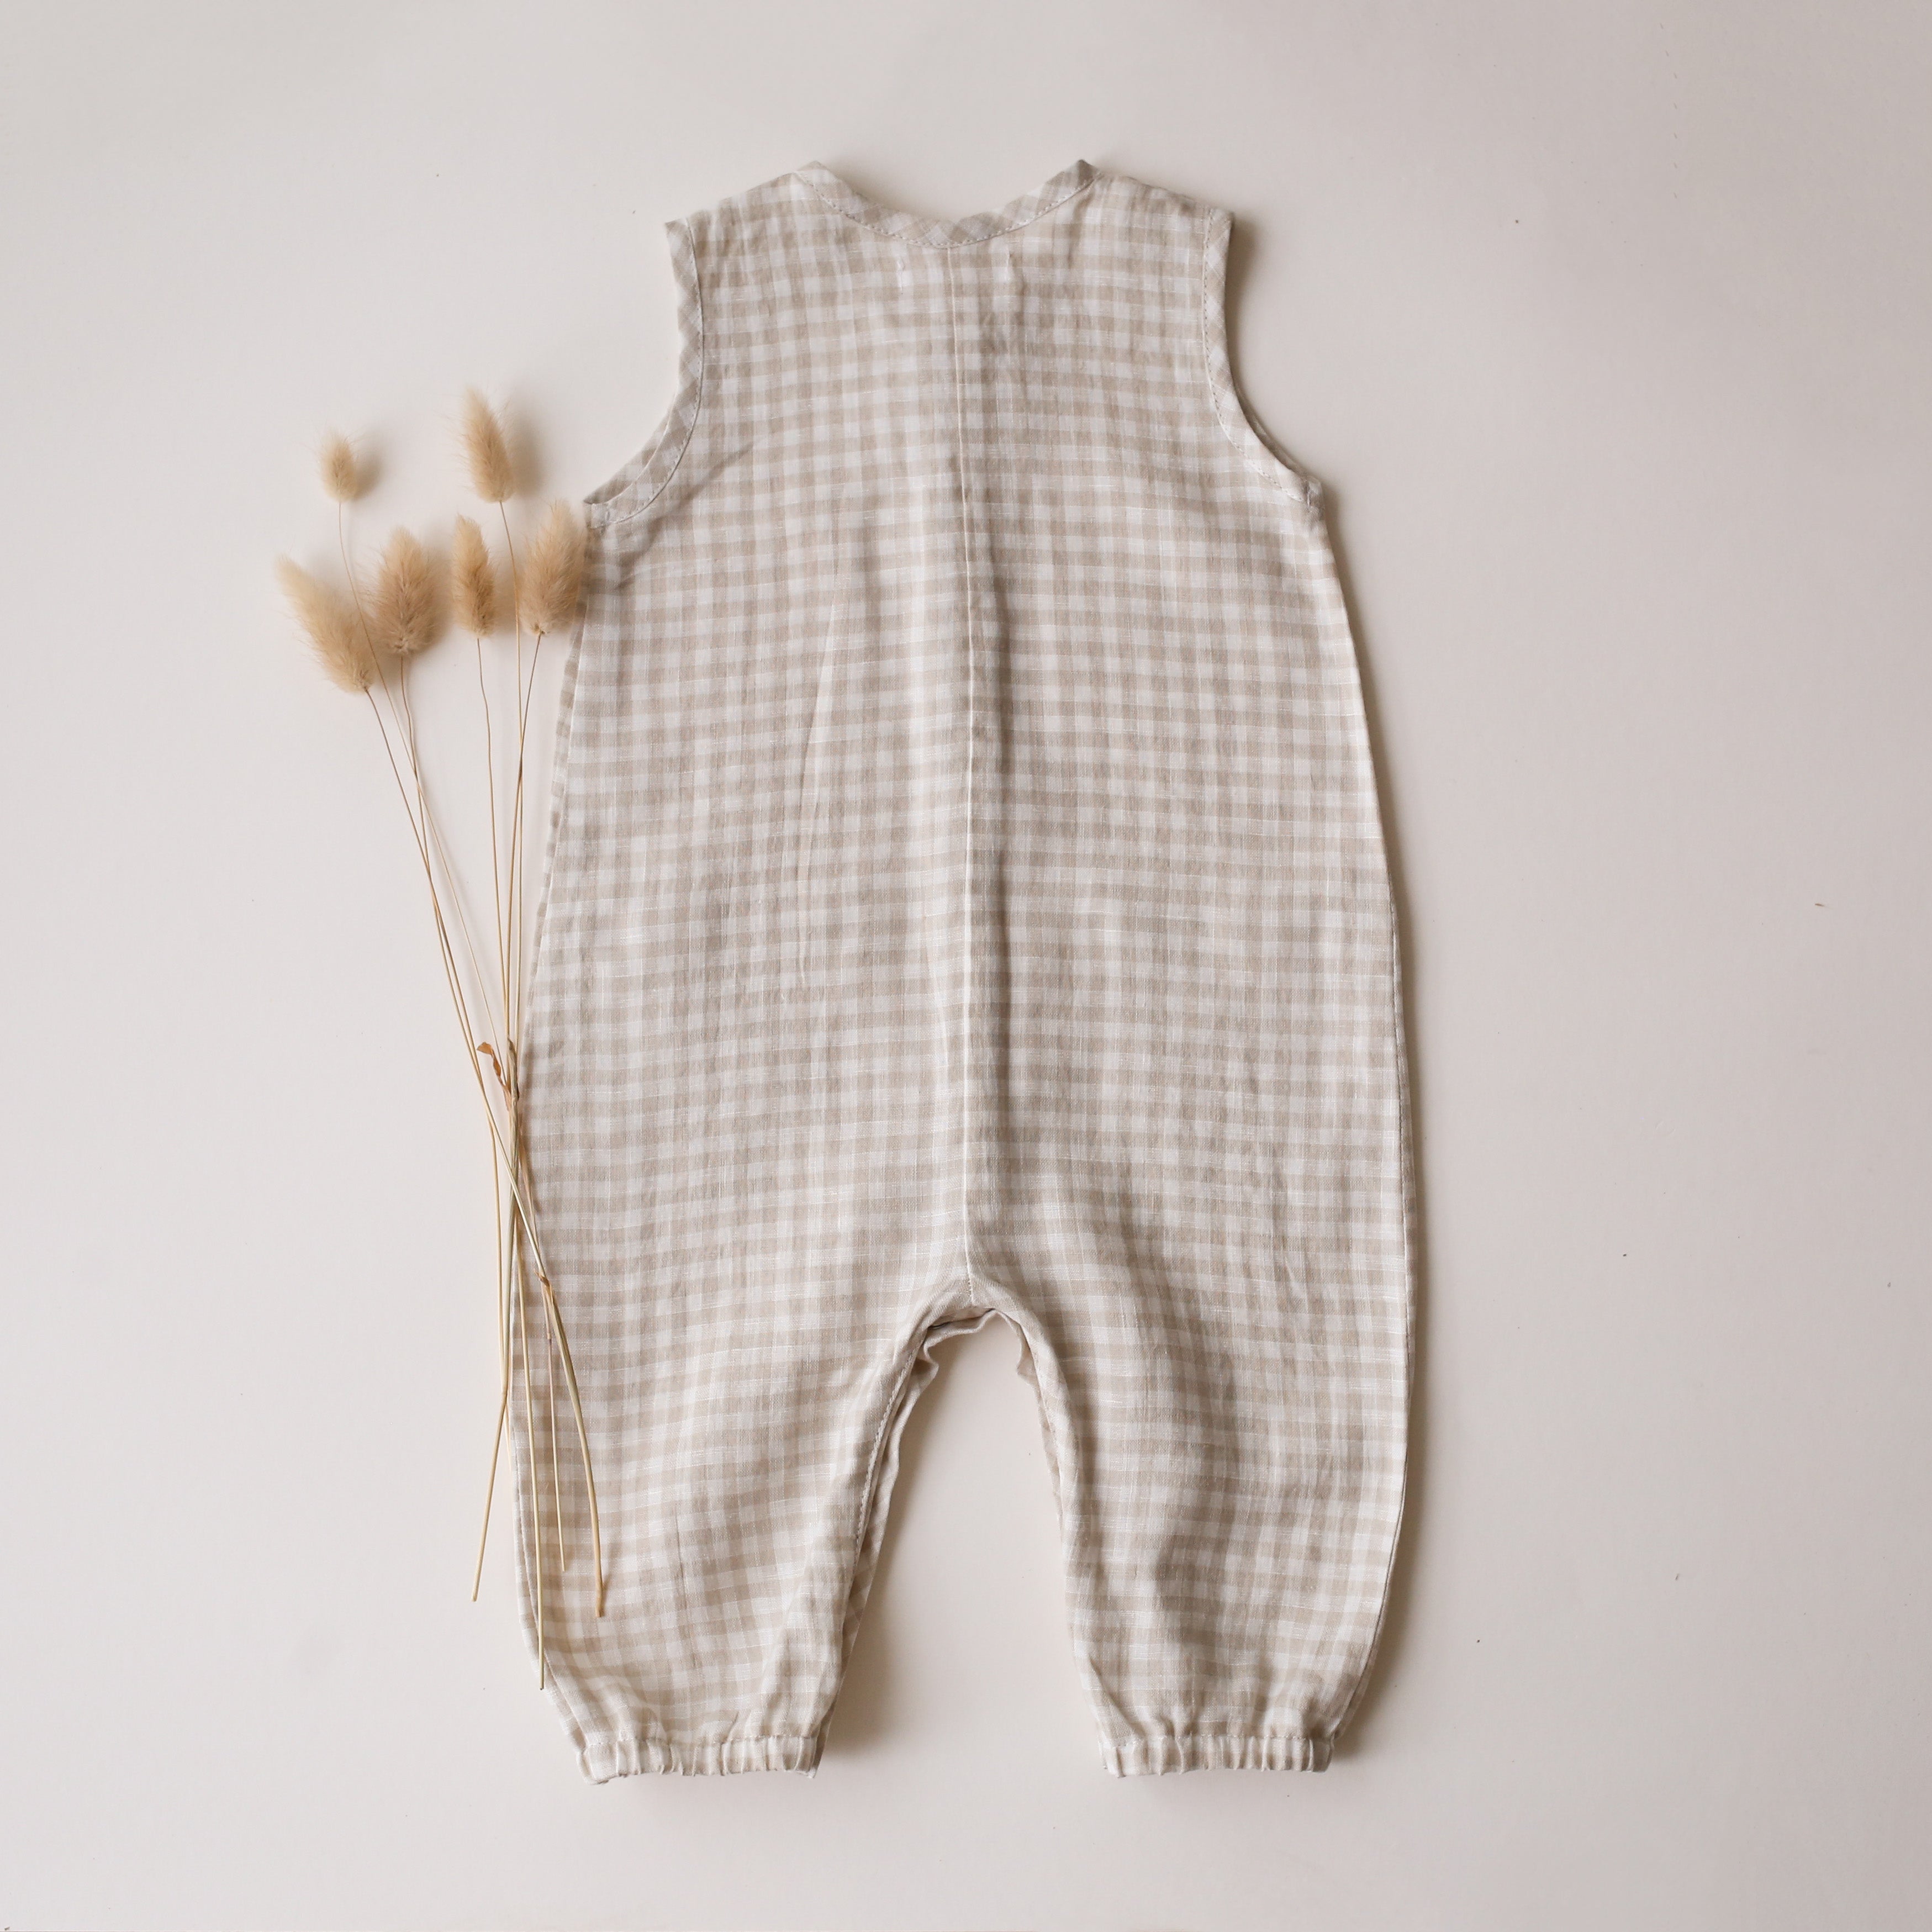 6-9 months - Beige Gingham Linen Tank Buttoned Jumpsuit with Pockets